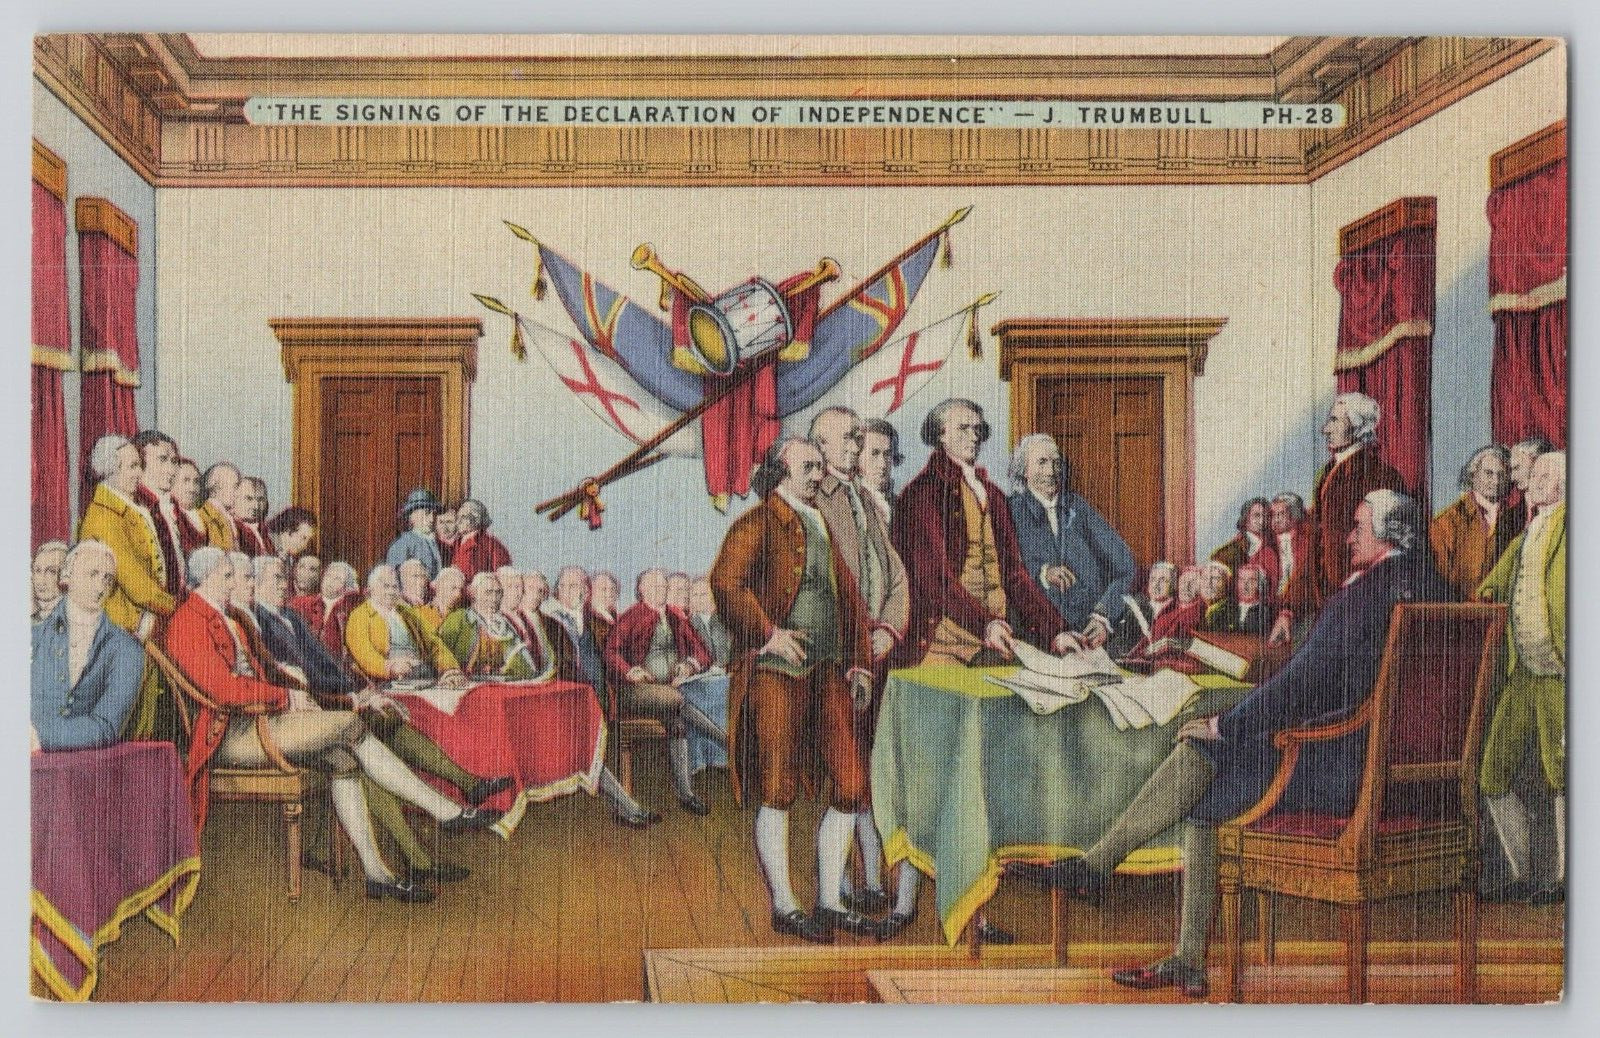 Postcard Signing of The Declaration of Independence, J.Trumbull